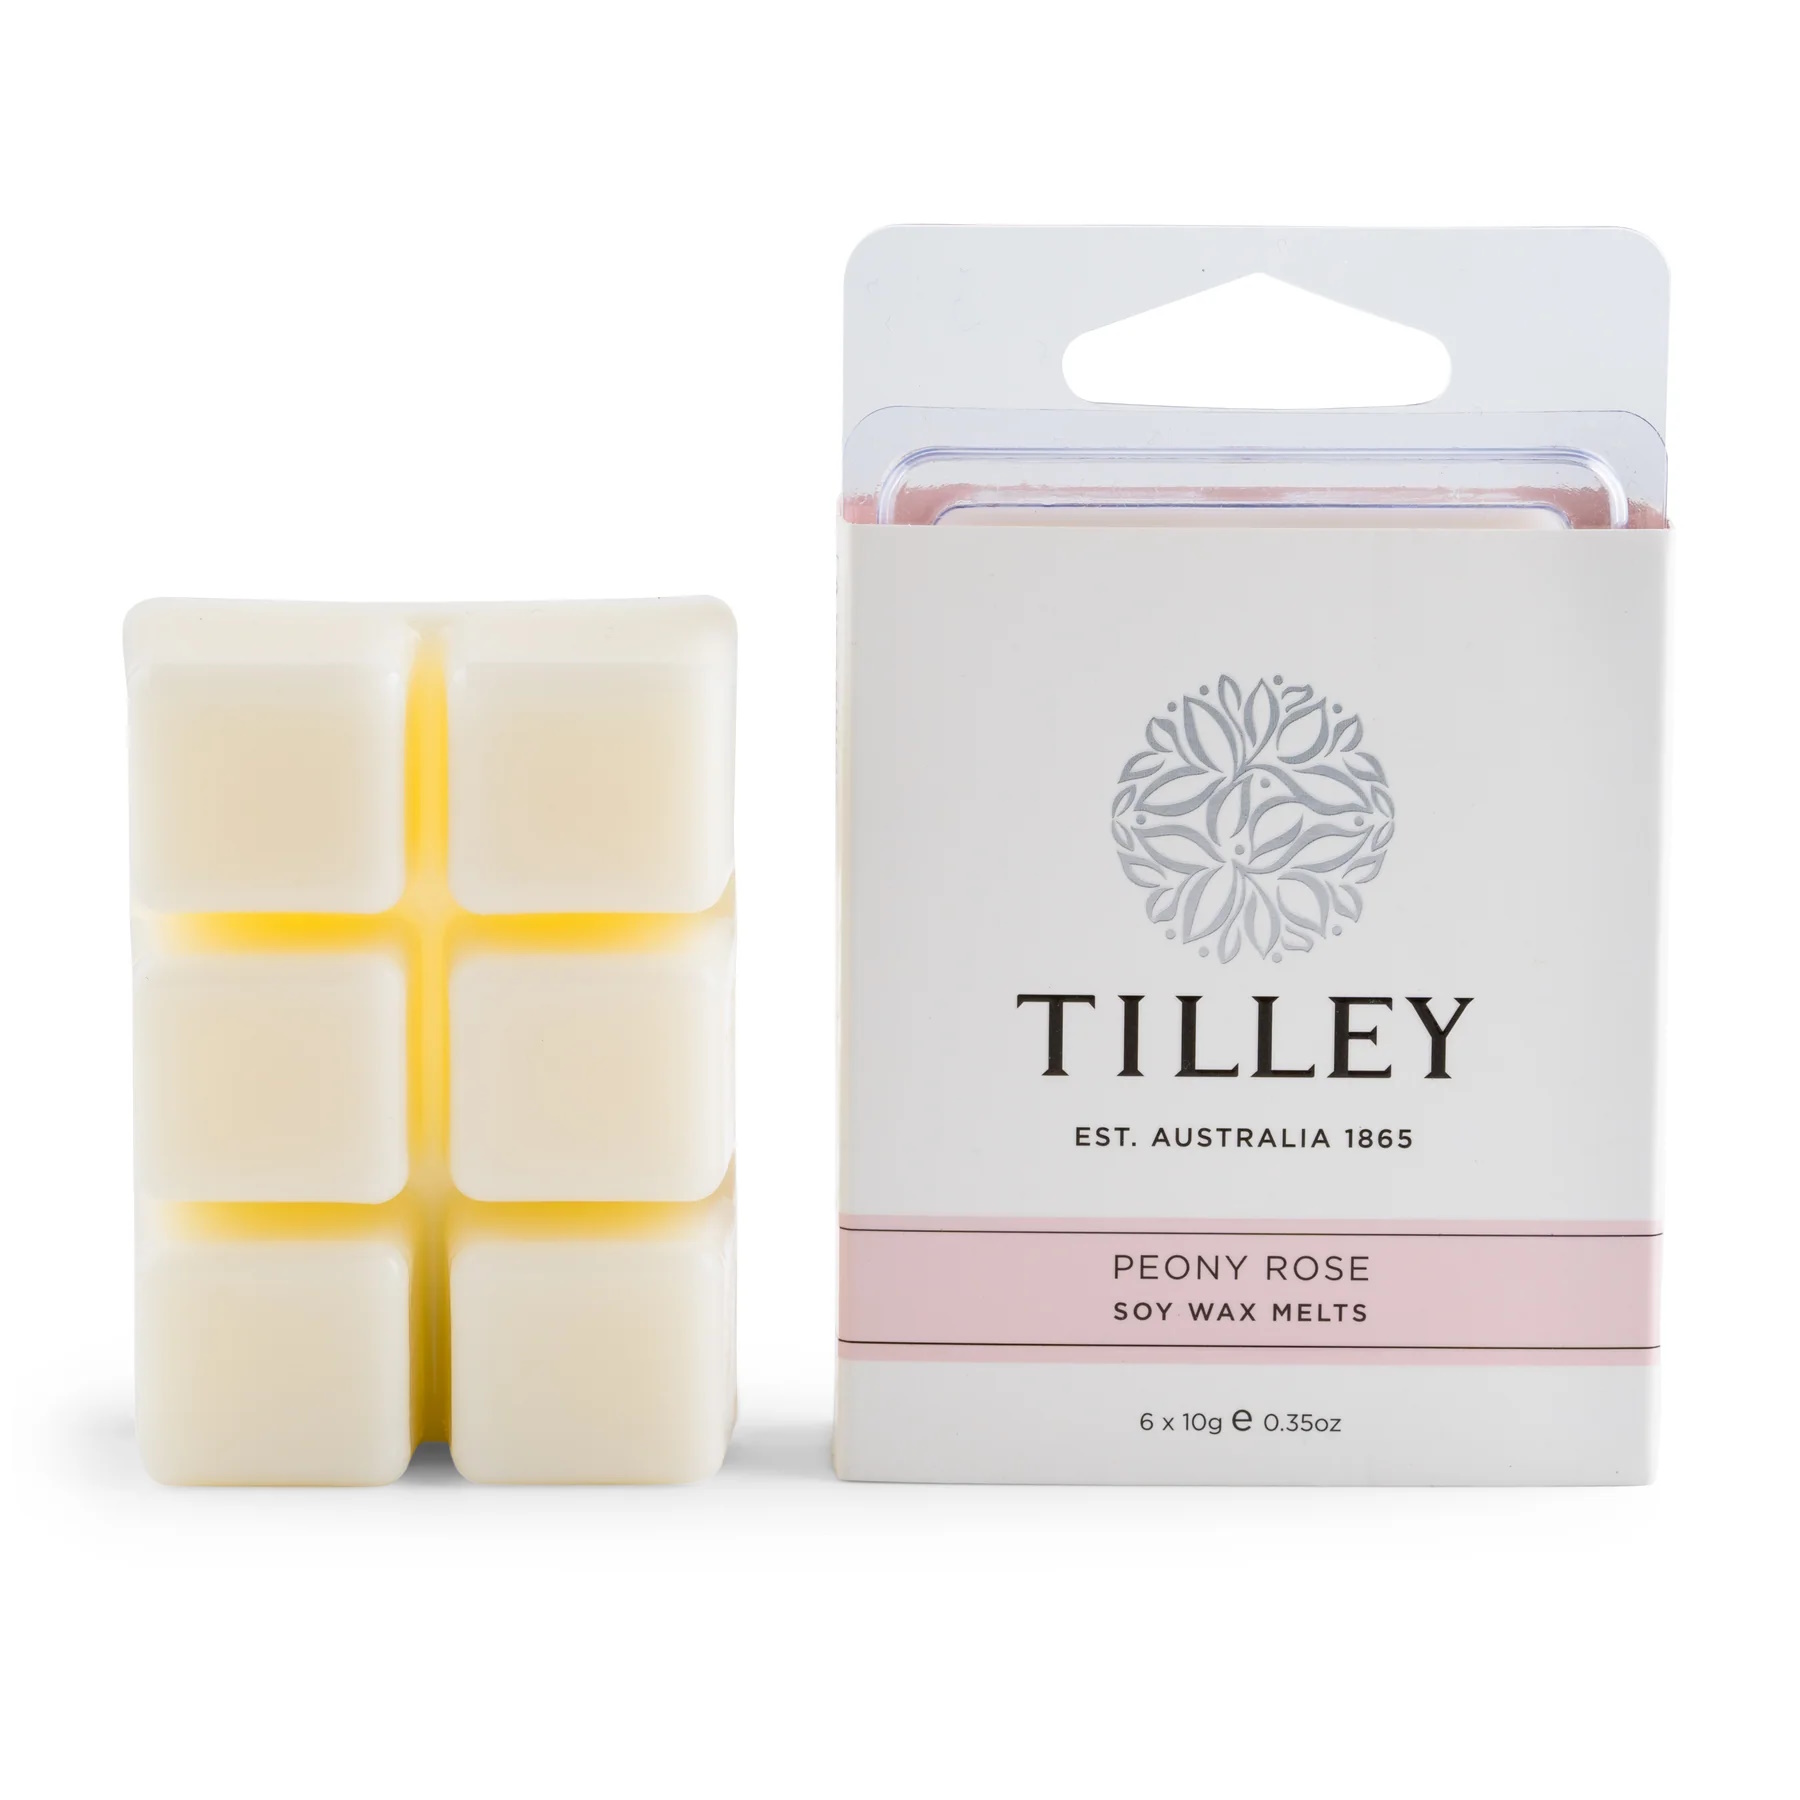 Tilley Peony Rose Square Soy Wax Melts 60g